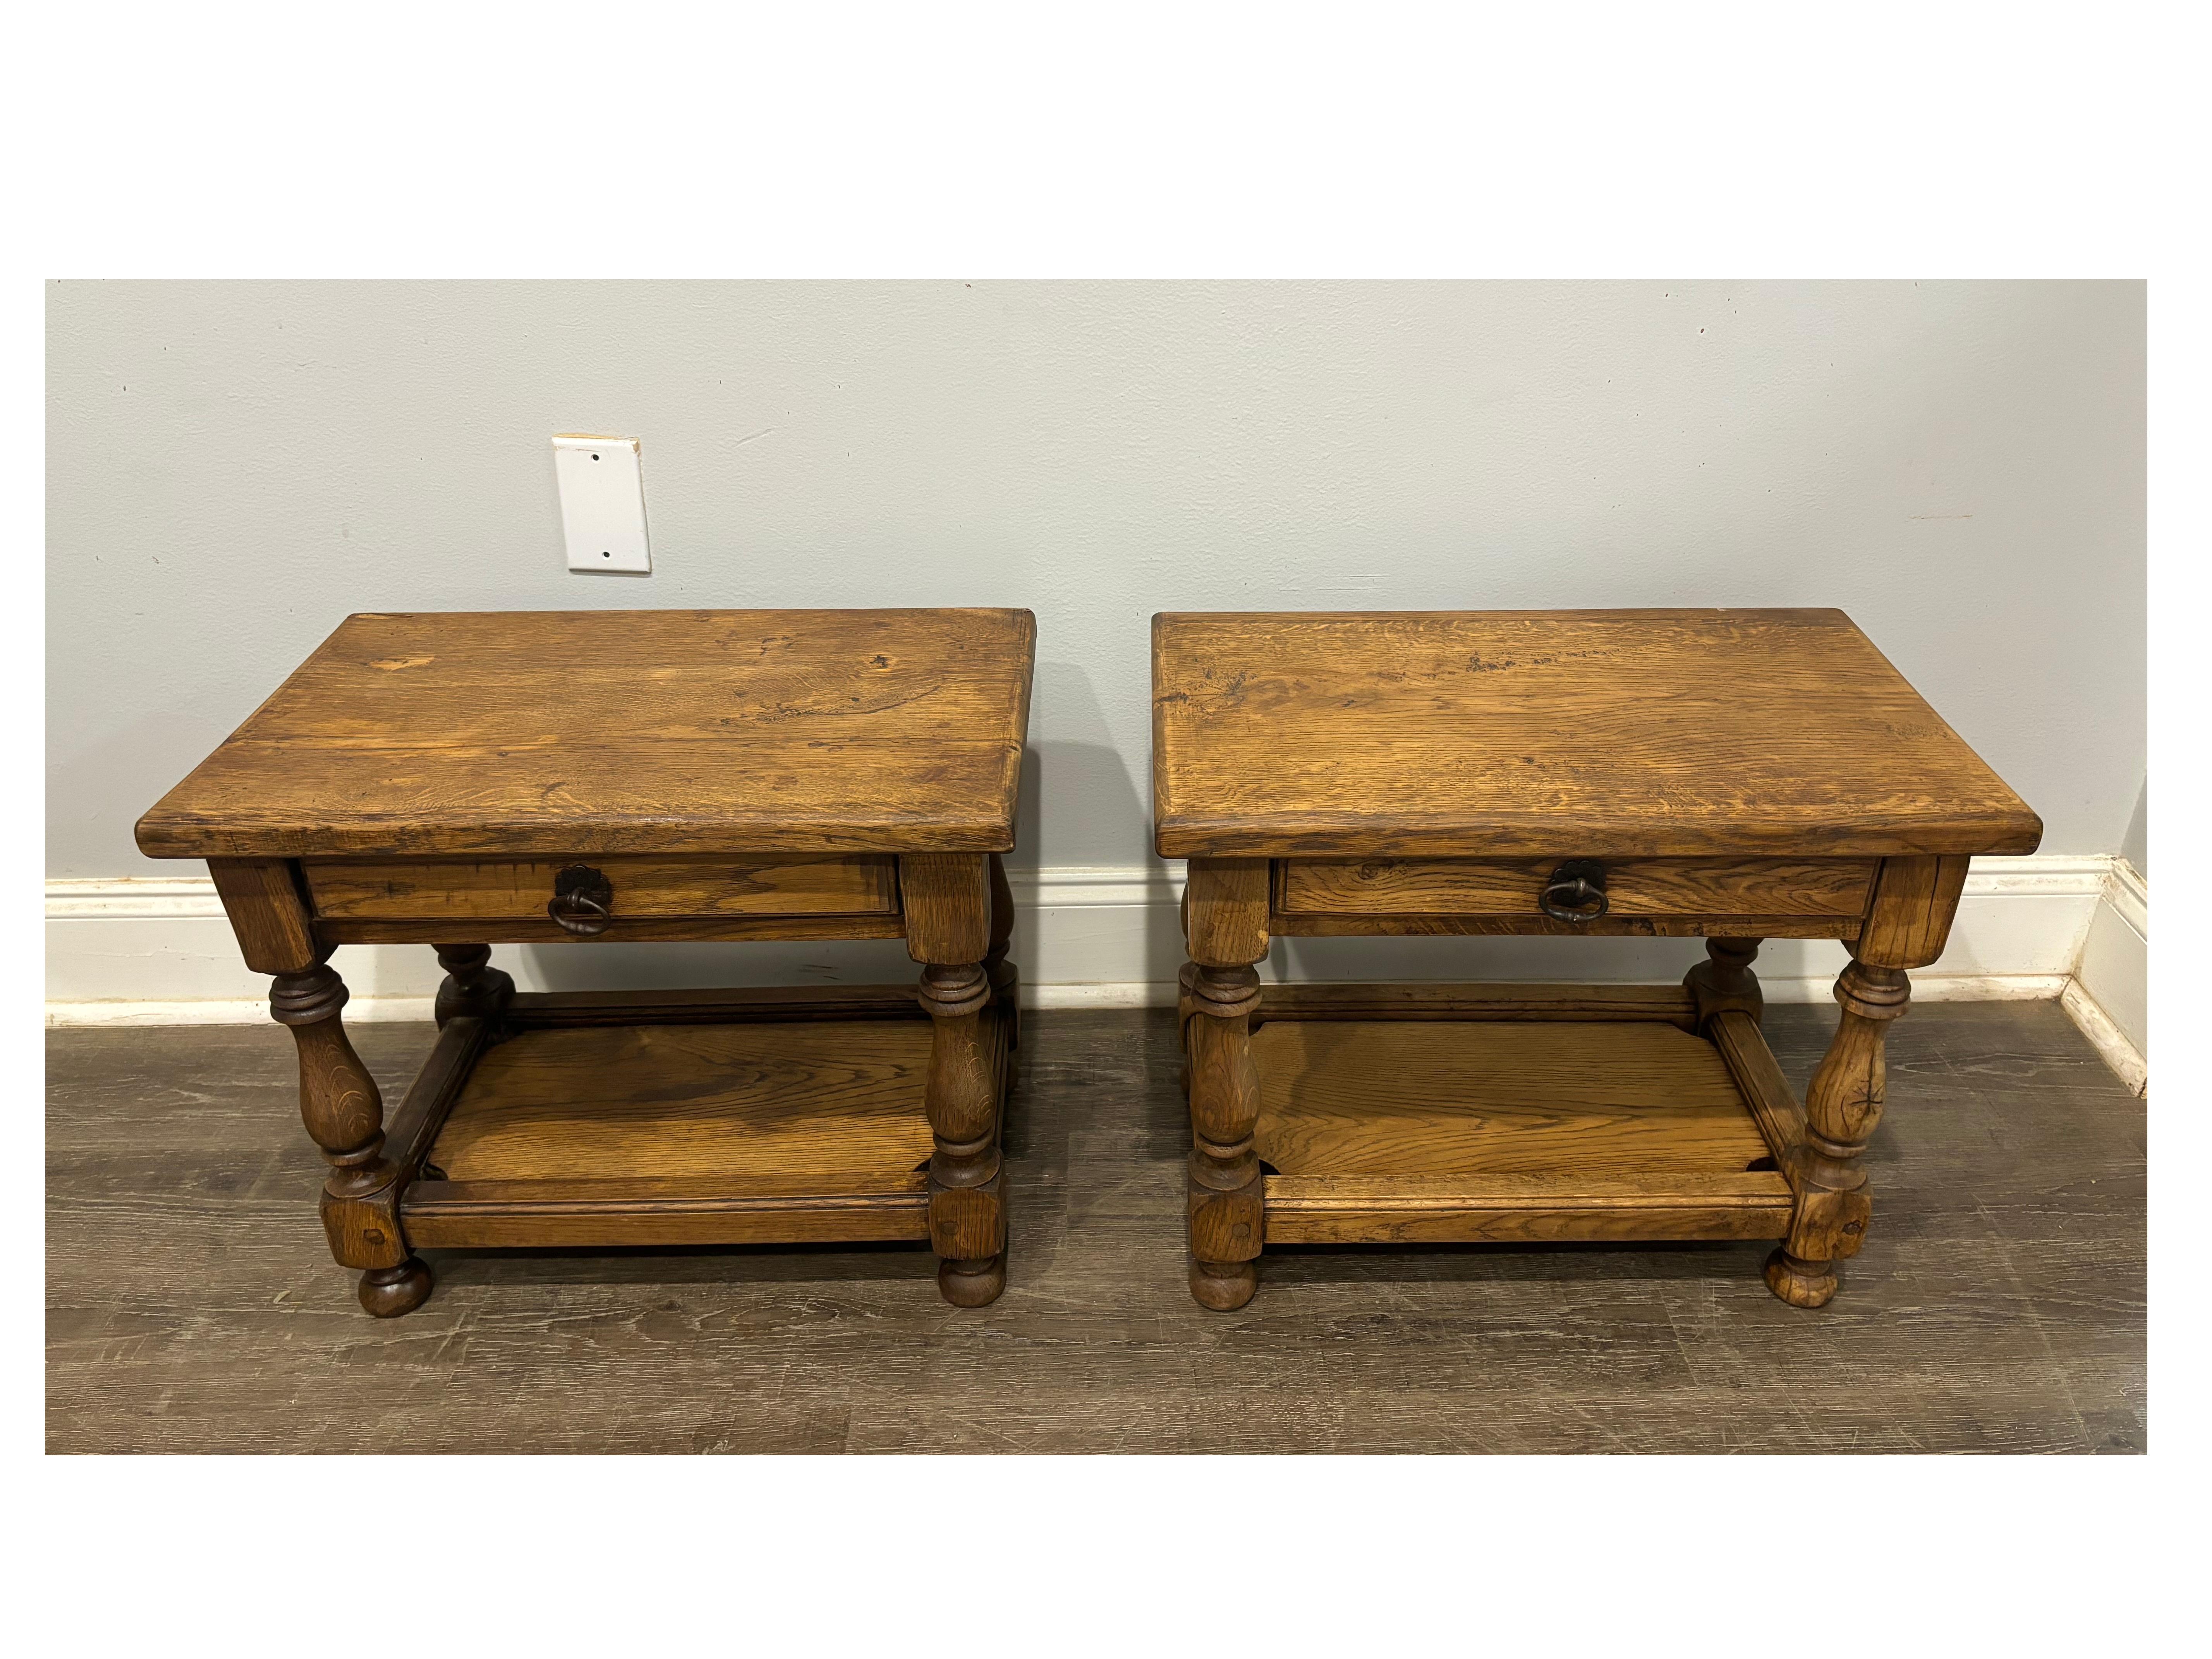 This pair of side tables are made of blond oak, they are low and have a rustic look. 